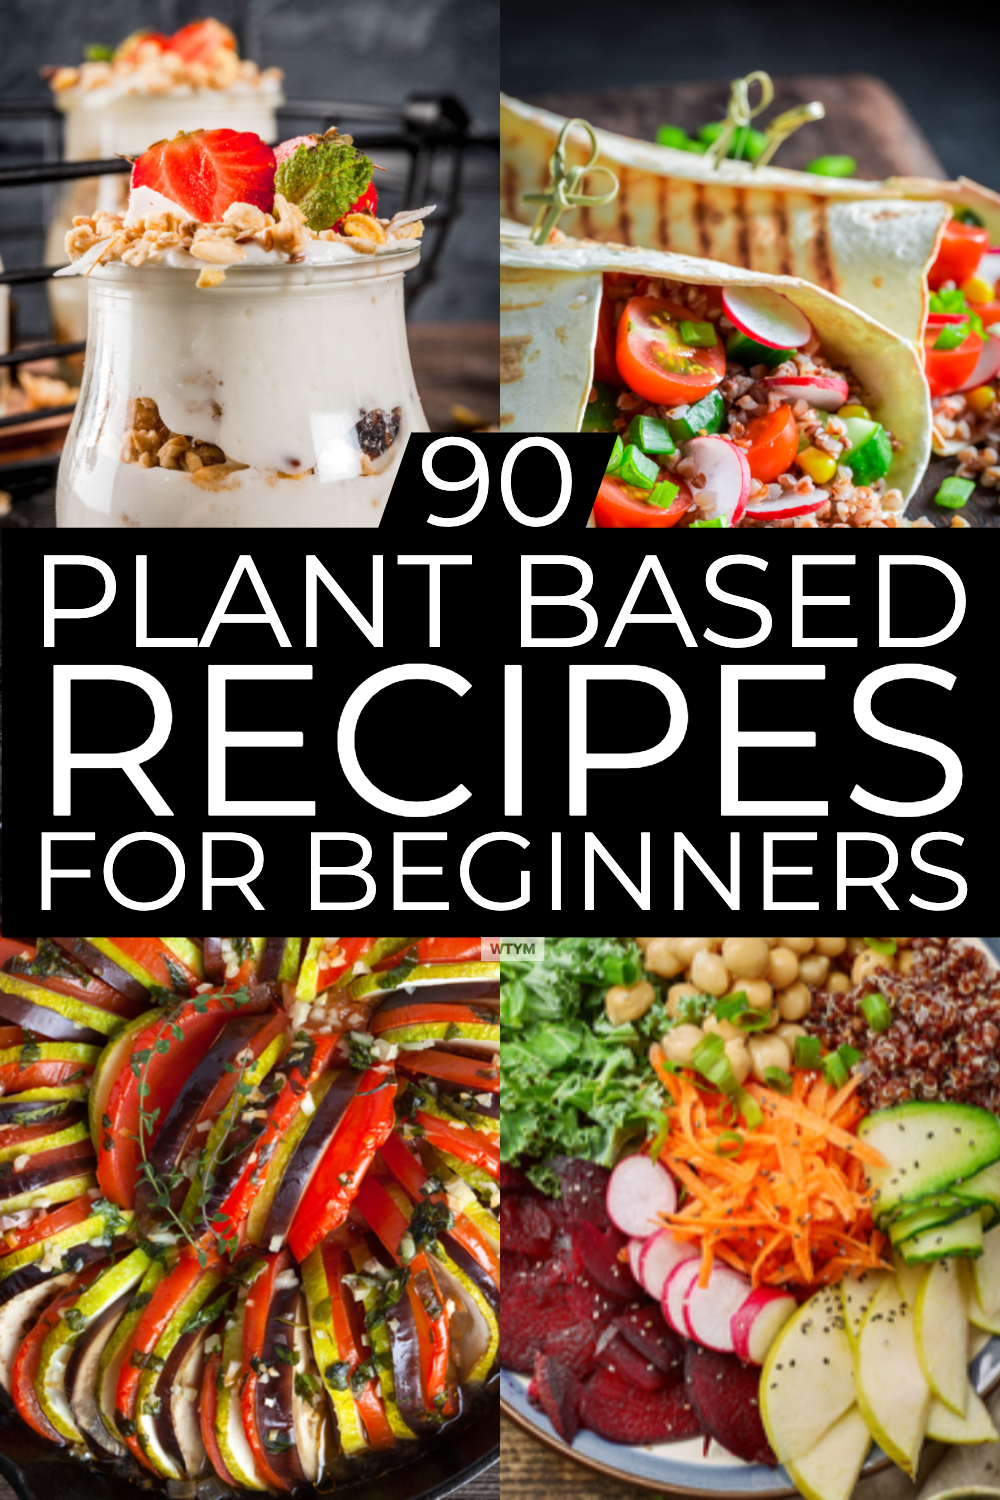 Plant Based Diet Meal Plan For Beginners: 21 Days of Whole Food Recipes To Help You Lose Weight -   11 healthy recipes Diet grocery lists ideas